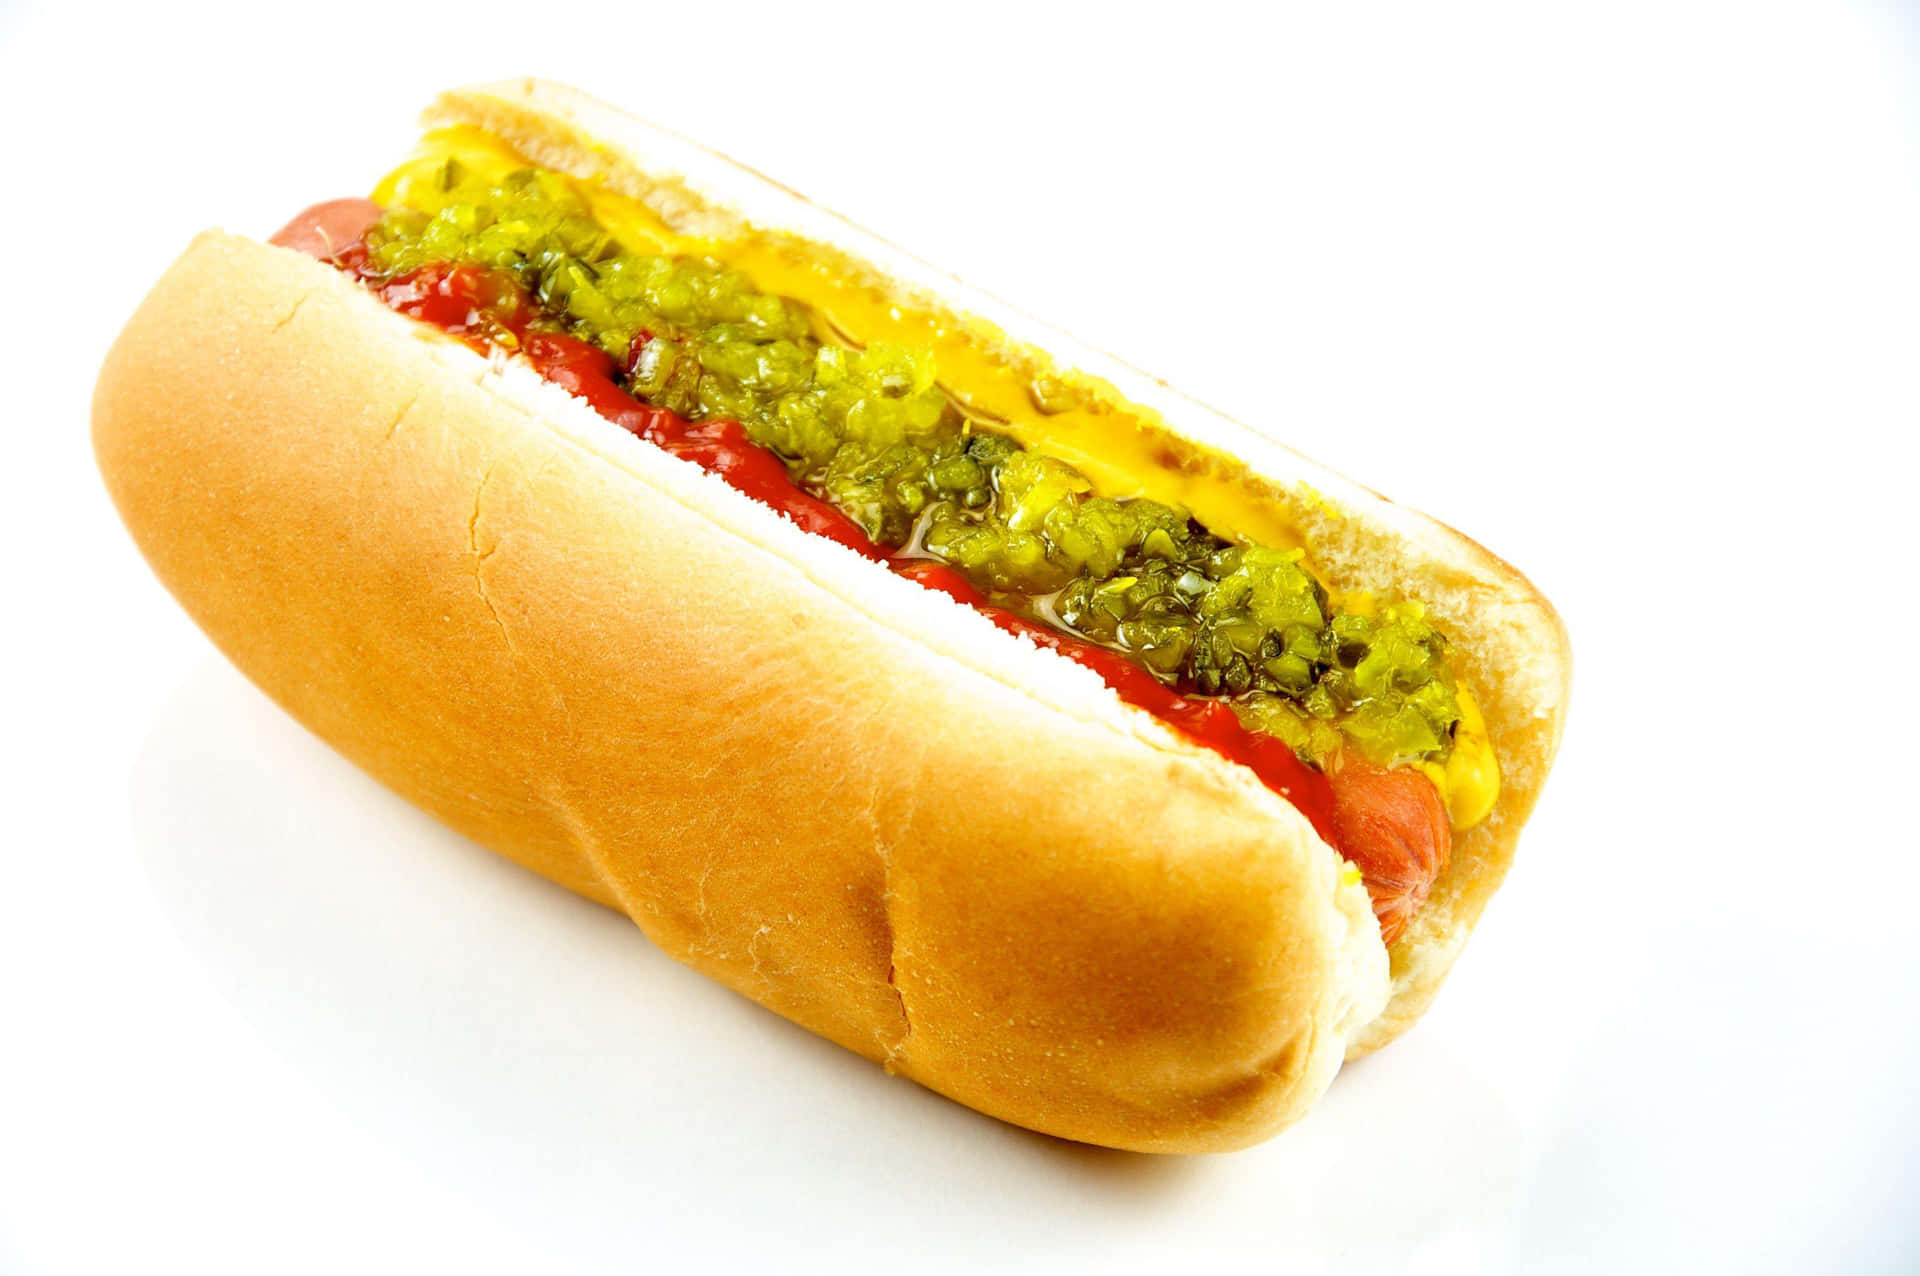 A Hot Dog With Mustard And Relish